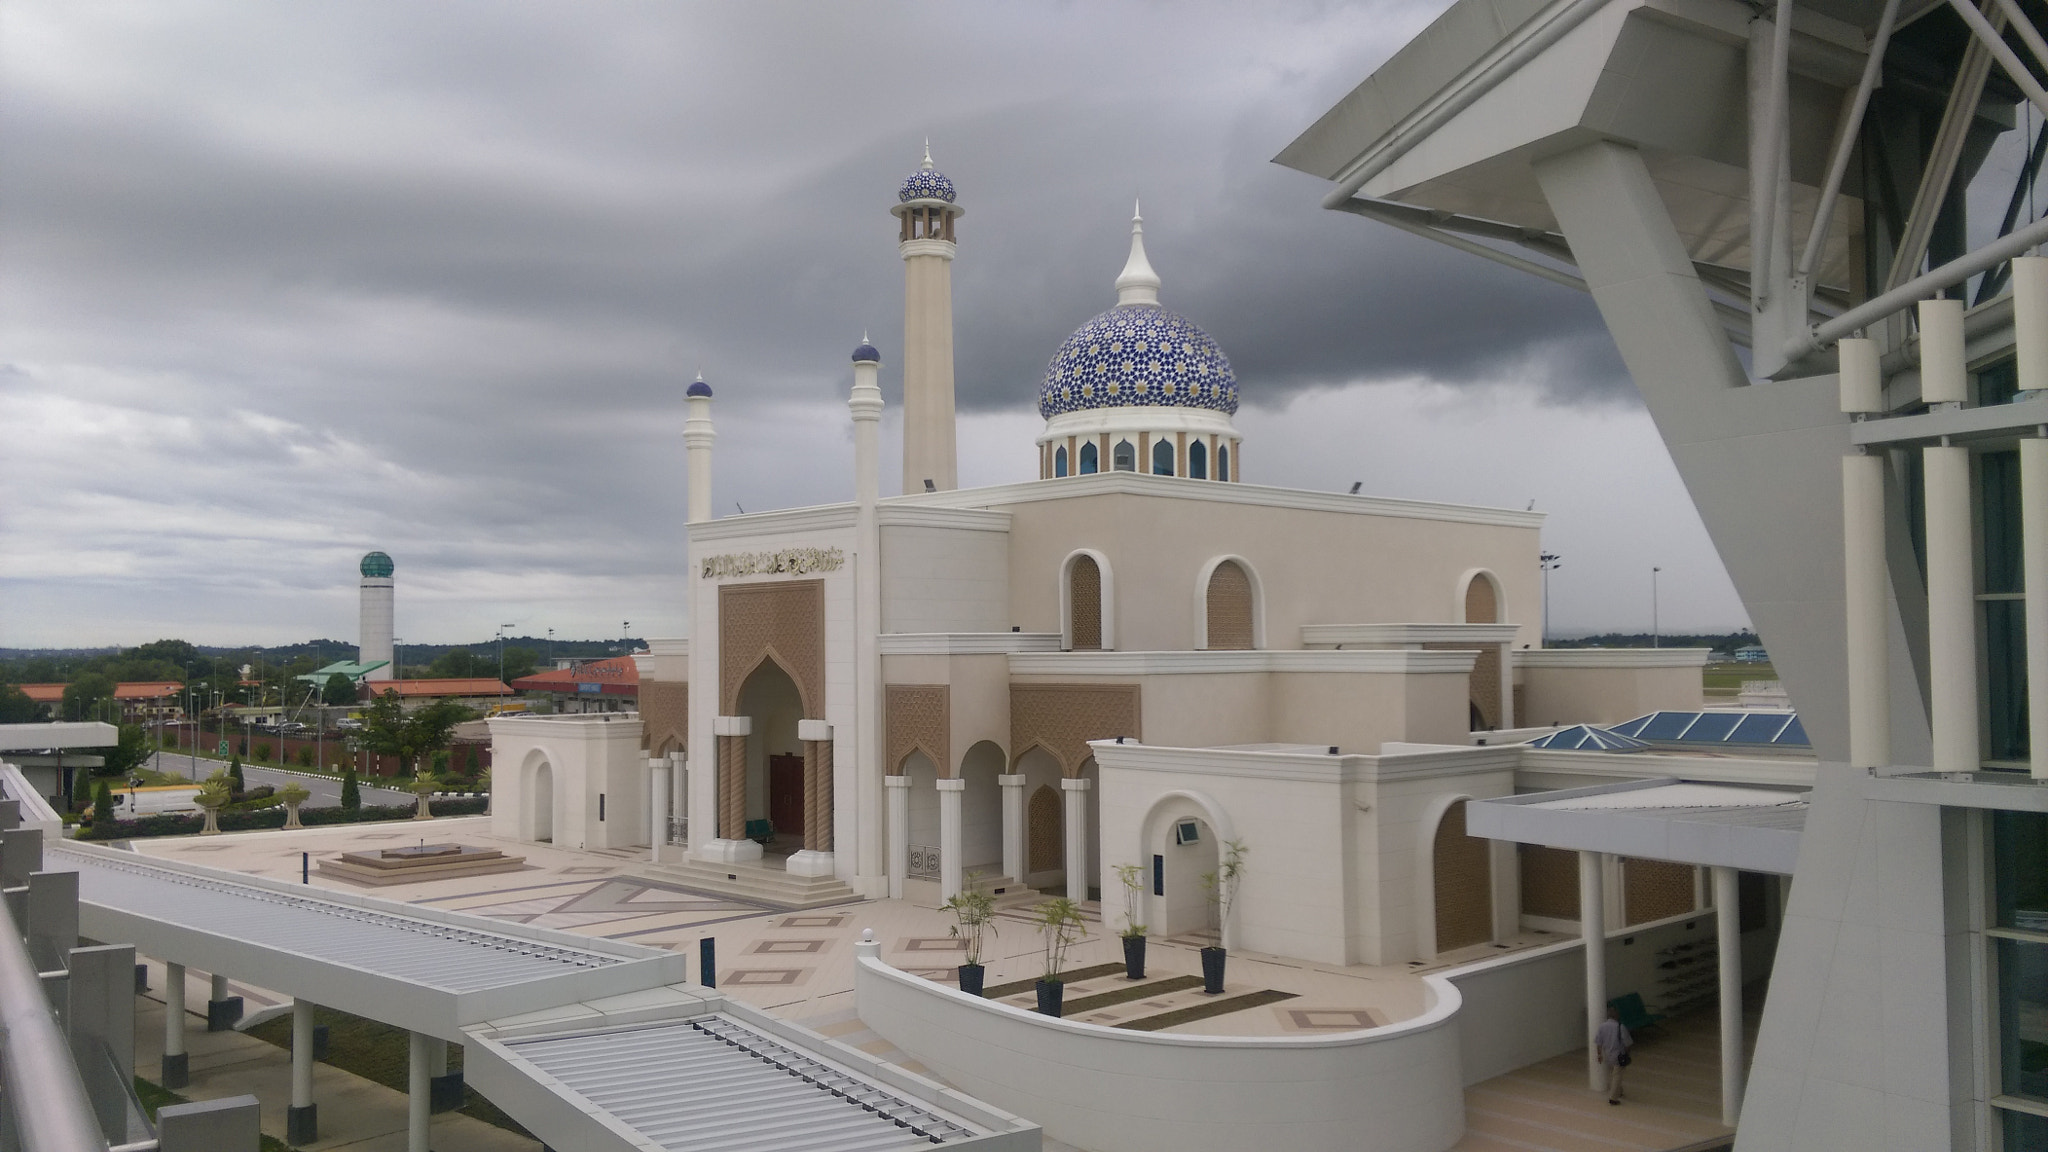 HTC DESIRE EYE sample photo. Mosque with cloudy background photography